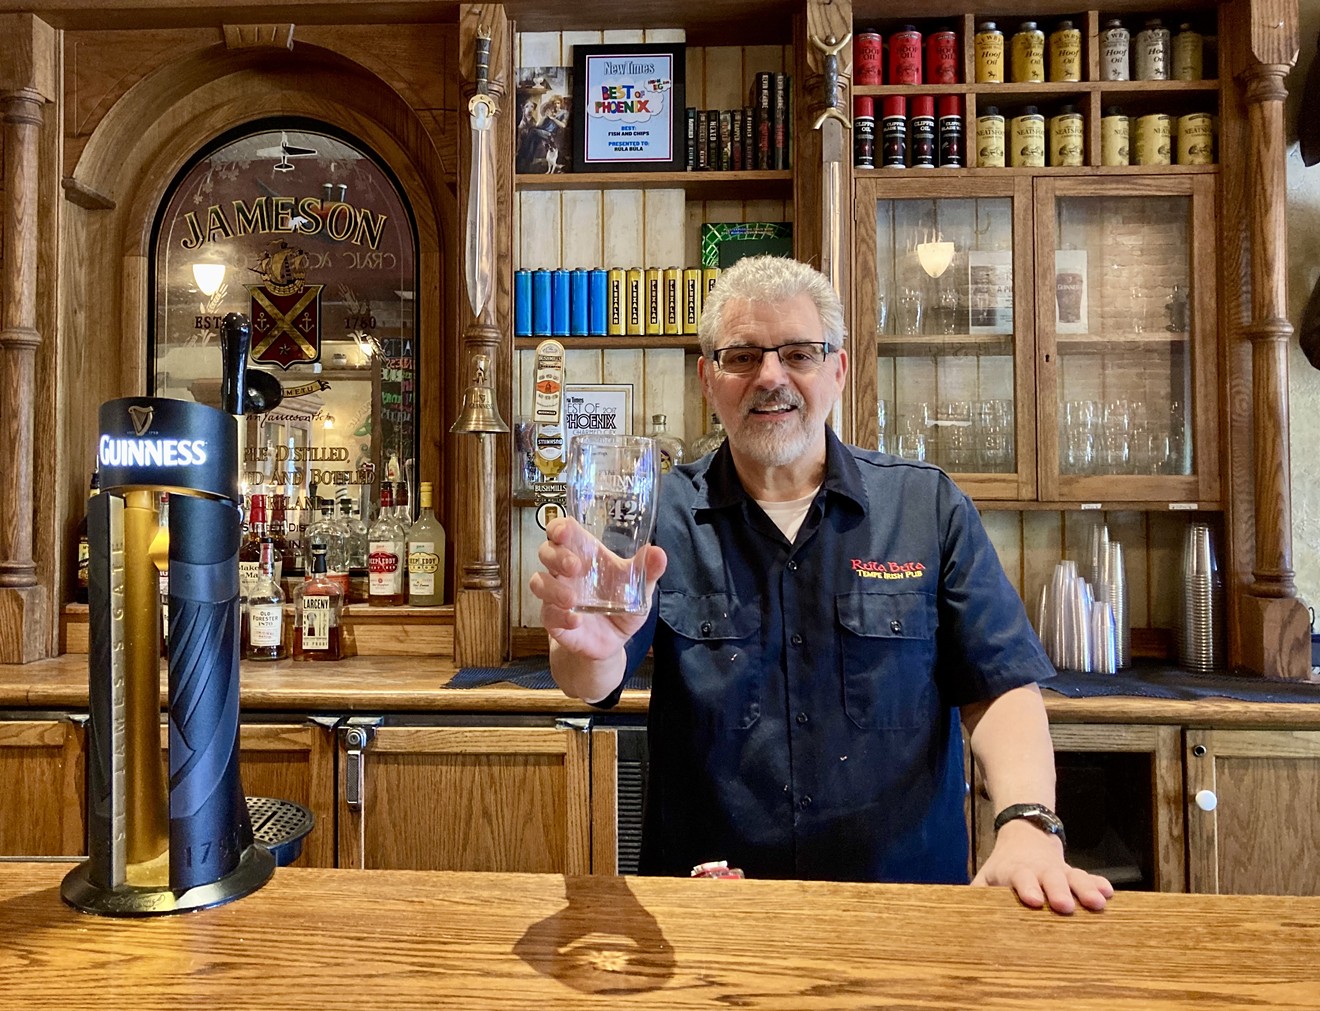 Steve Goumas, founder of Rula Bula, imported much of the decor for the pub from Ireland. That decor, including the bar, will be used at the pop-up at the Coca-Cola Sun Deck at Mountain America Stadium.